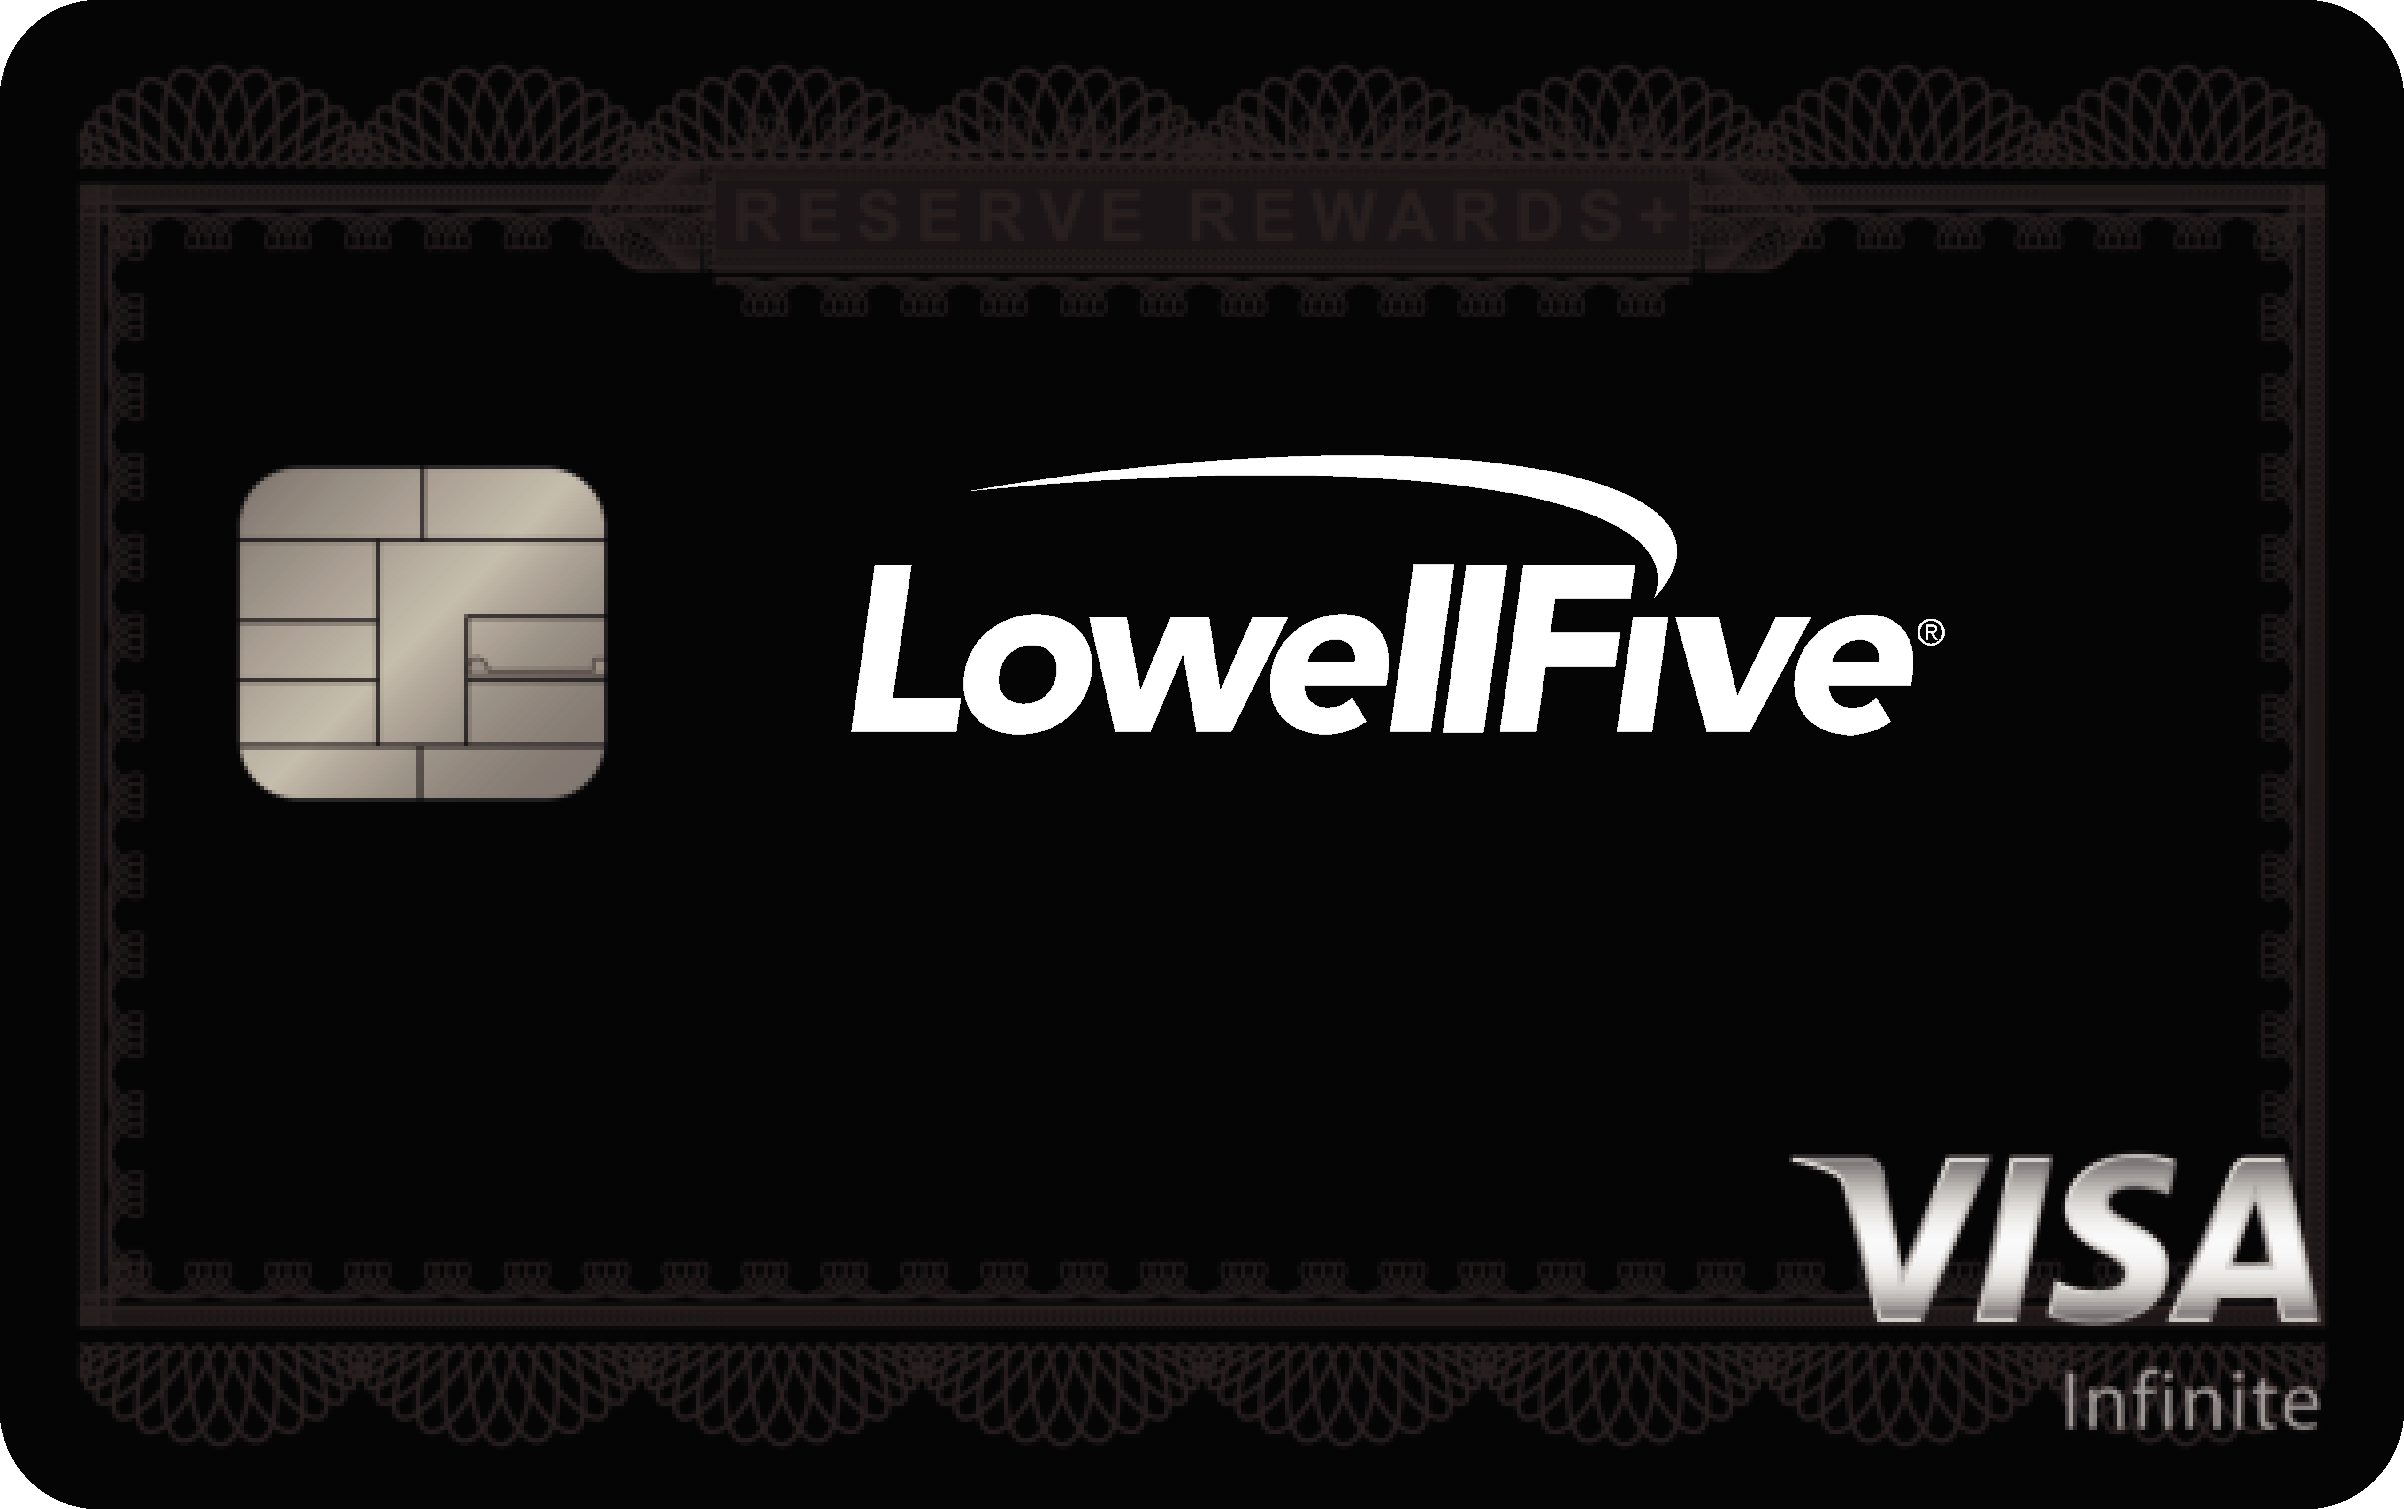 Lowell Five Bank Reserve Rewards+ Card